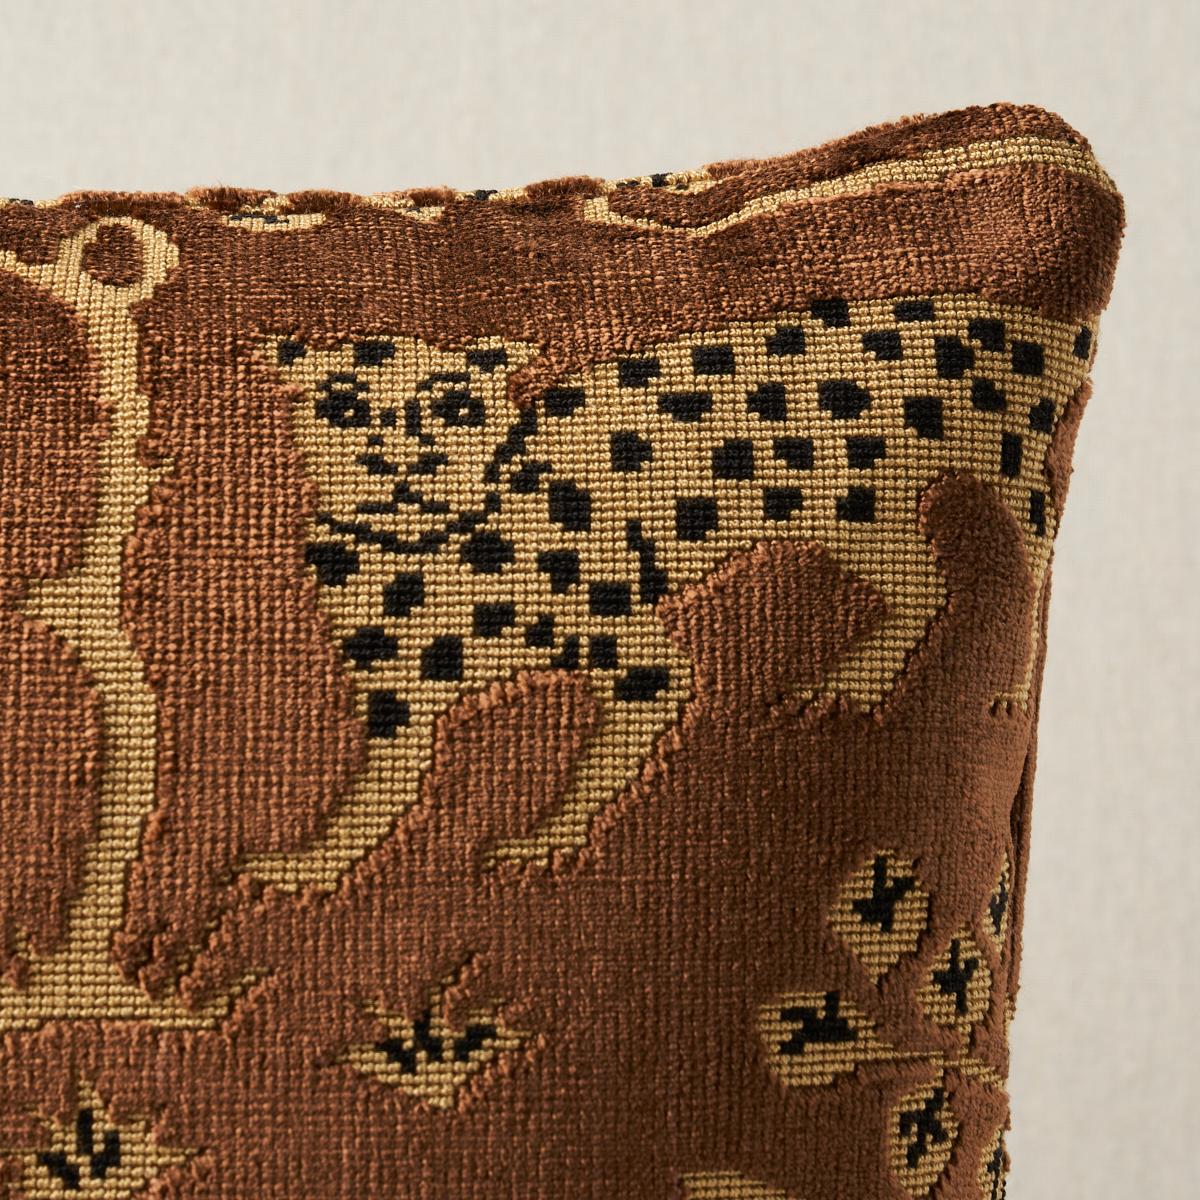 This pillow features Woodland Leopard Velvet with a knife edge finish. A host of historic paintings and textiles served as source material for this fabulously stylized leopard and tree motif. The midscale mirrored repeat design combines loop-and-cut